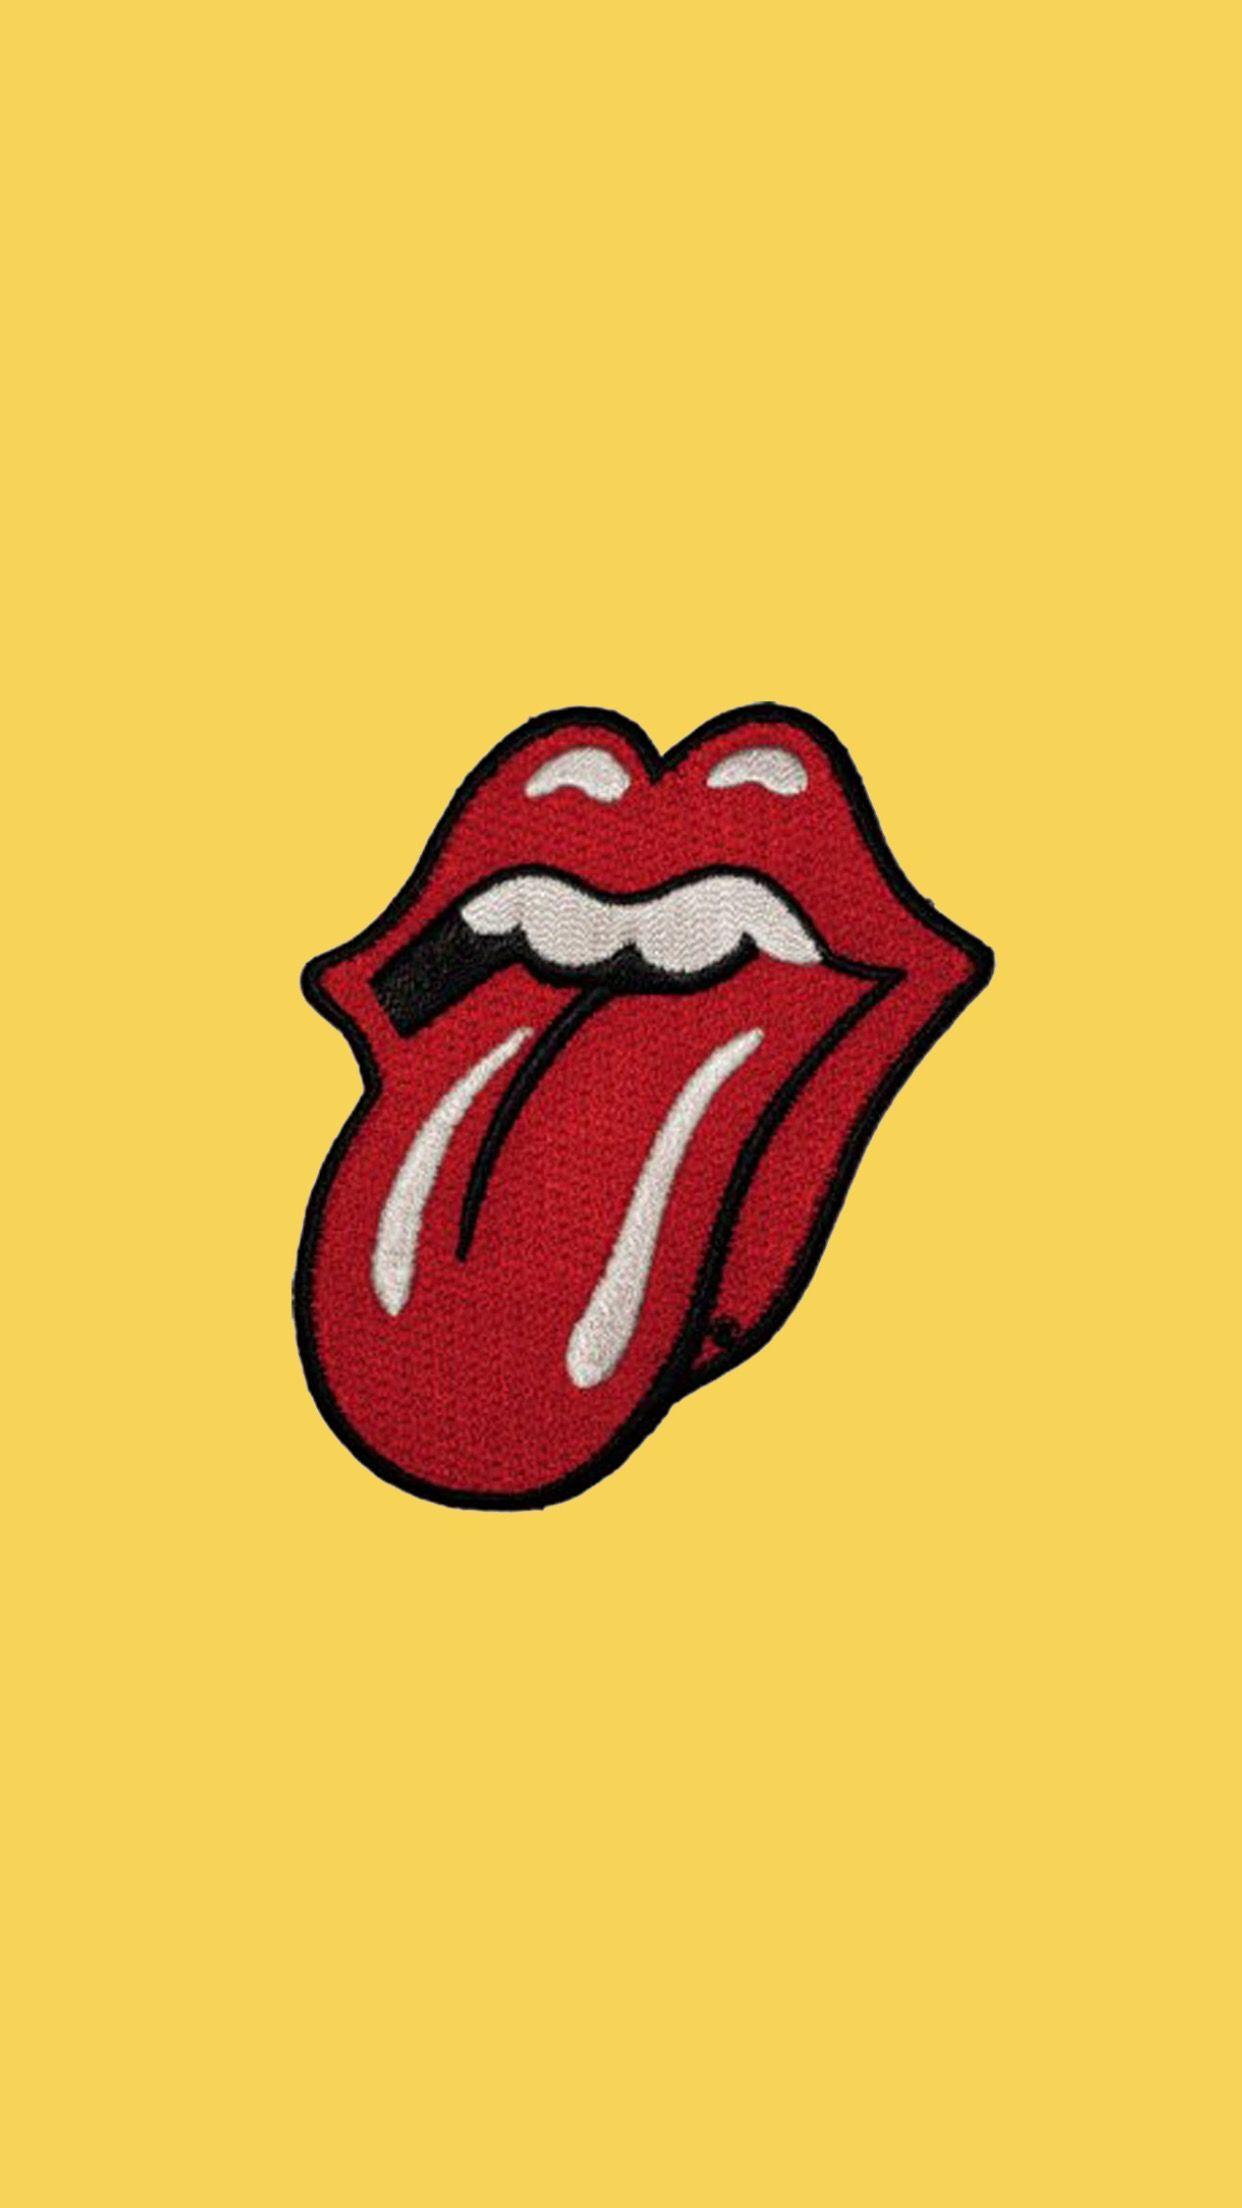 Red Lips and Tongue Logo - Yellow Lockscreen / Wallpaper / Background Lips Aesthetic Red Lips ...